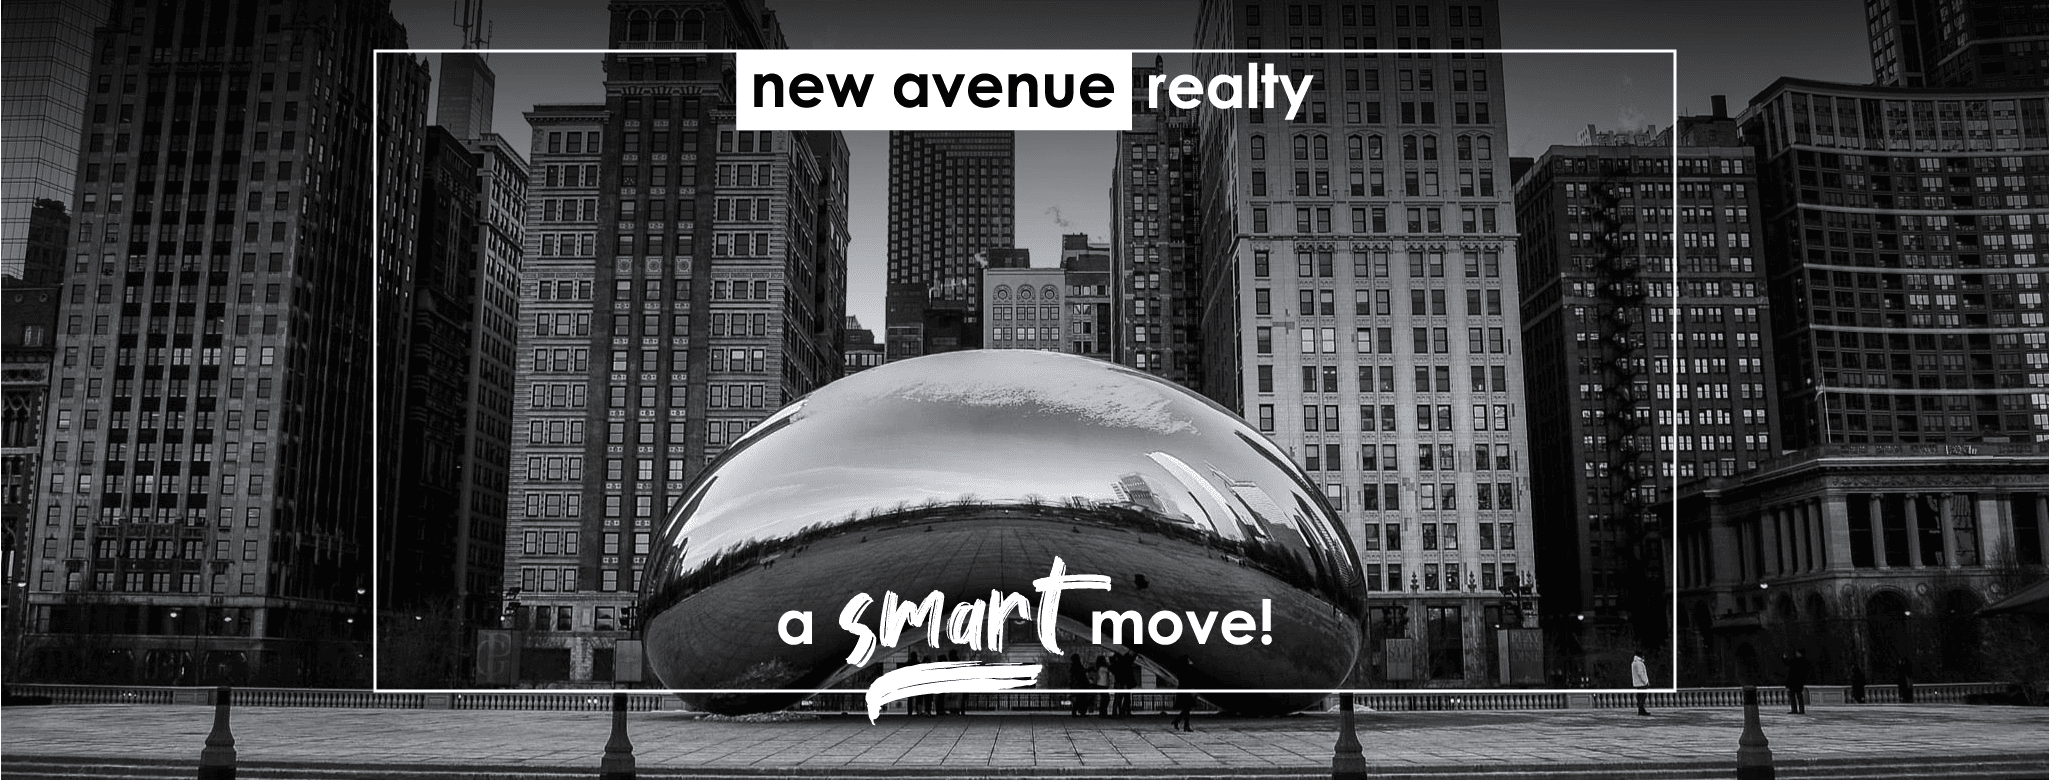 New Avenue Realty - Chicago, IL, US, real estate